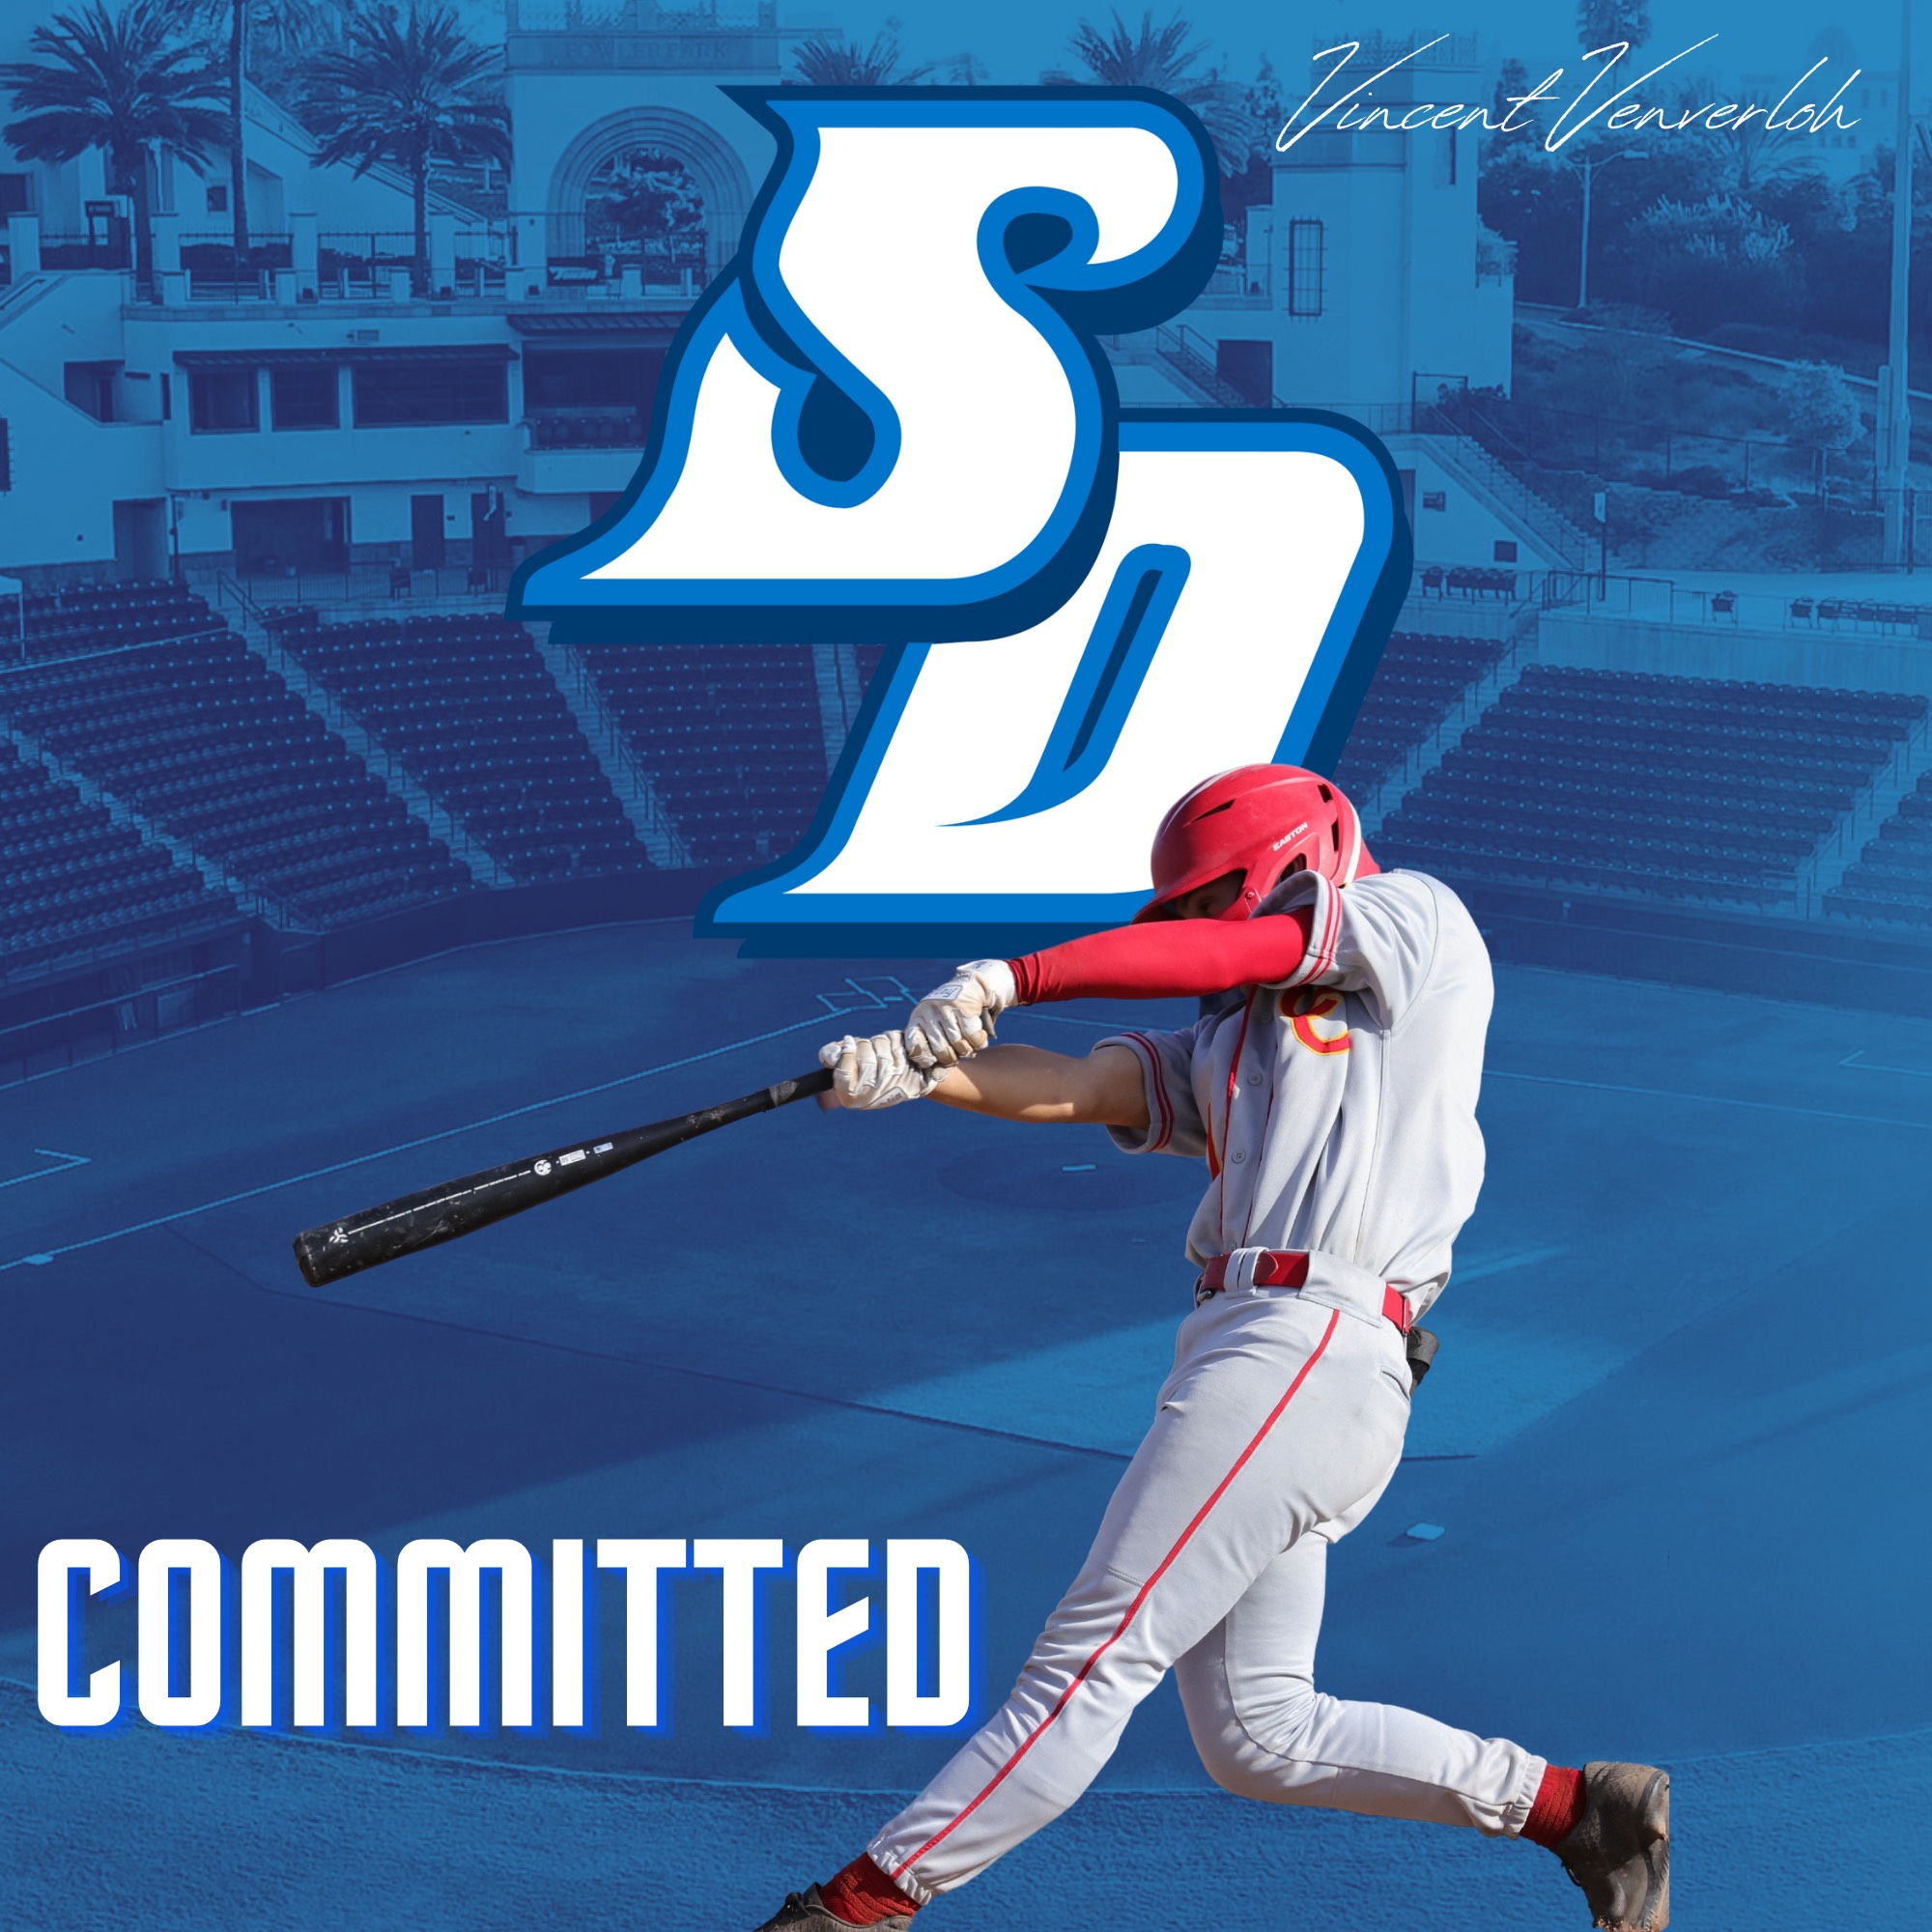 Vincent Venverloh Athlete Recruiting Story – Committed to the University of San Diego